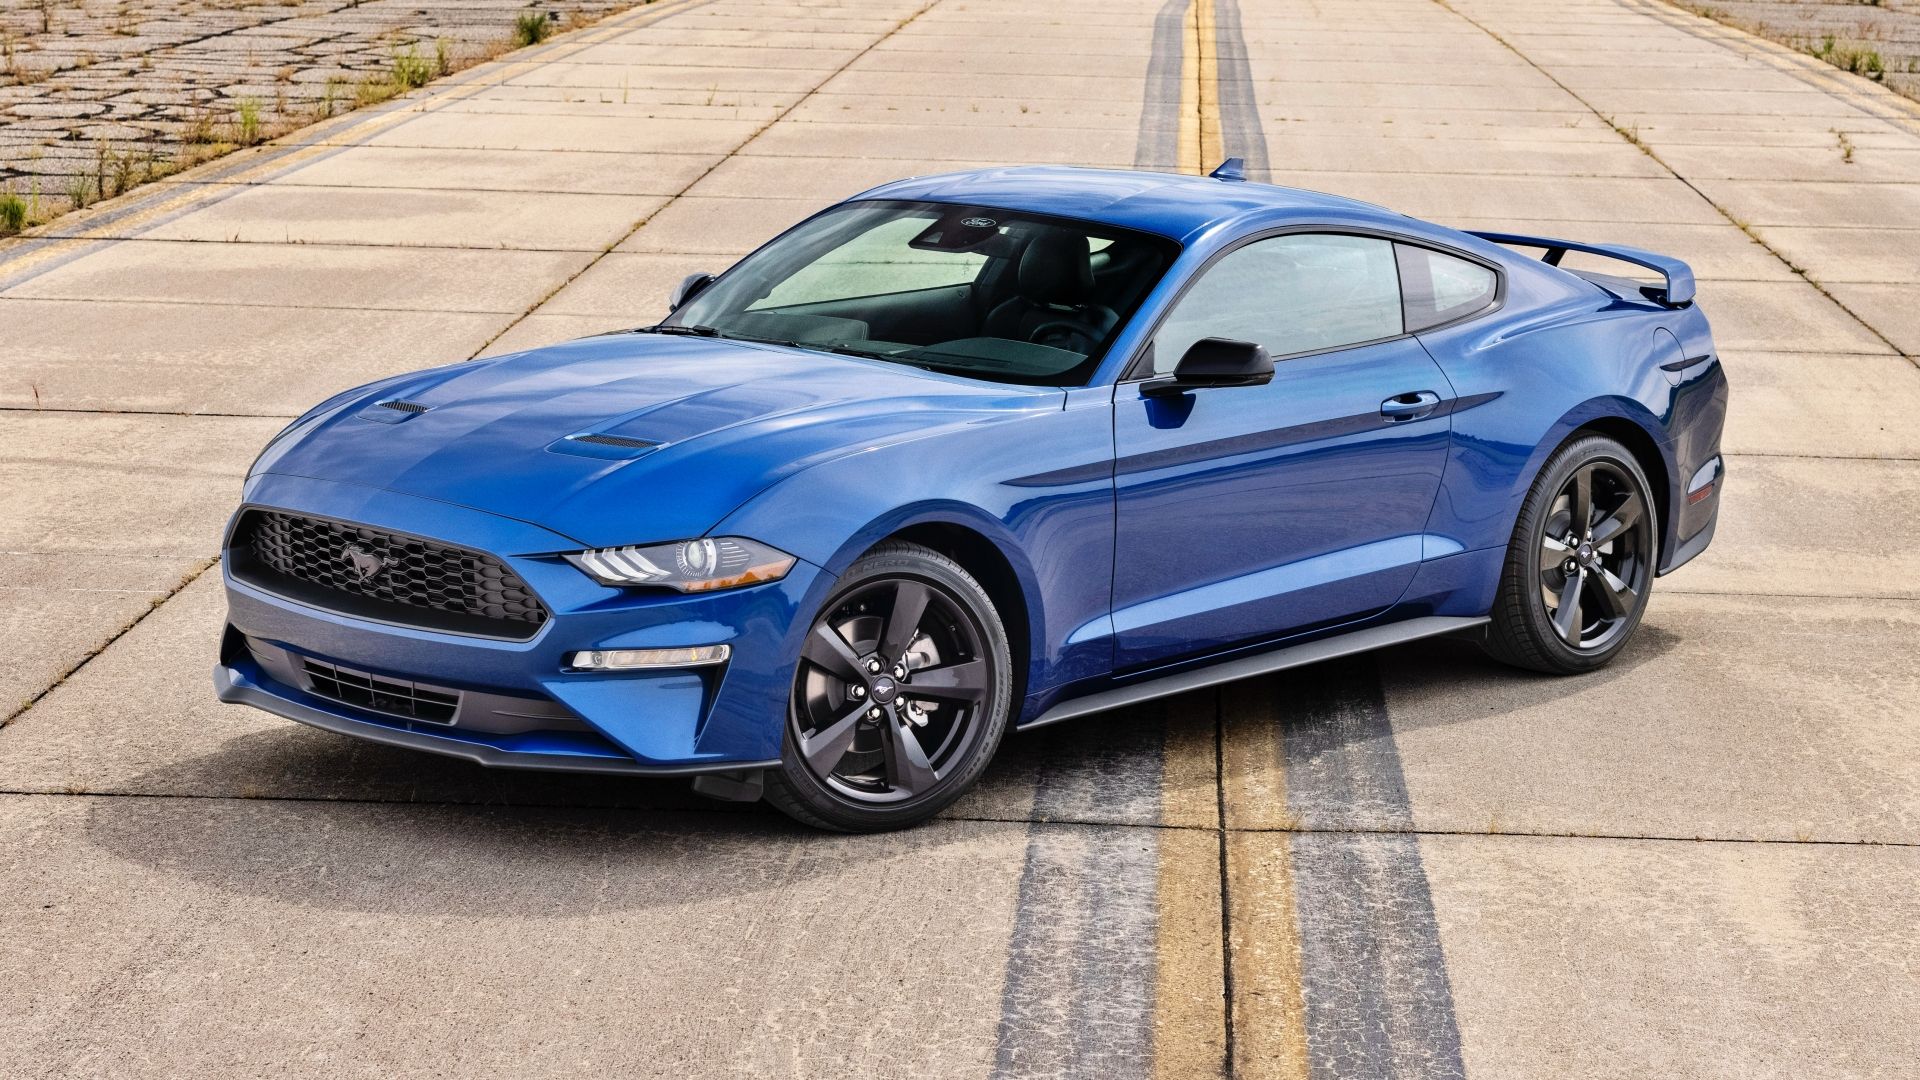 Blue Ford Mustang Stealth Edition